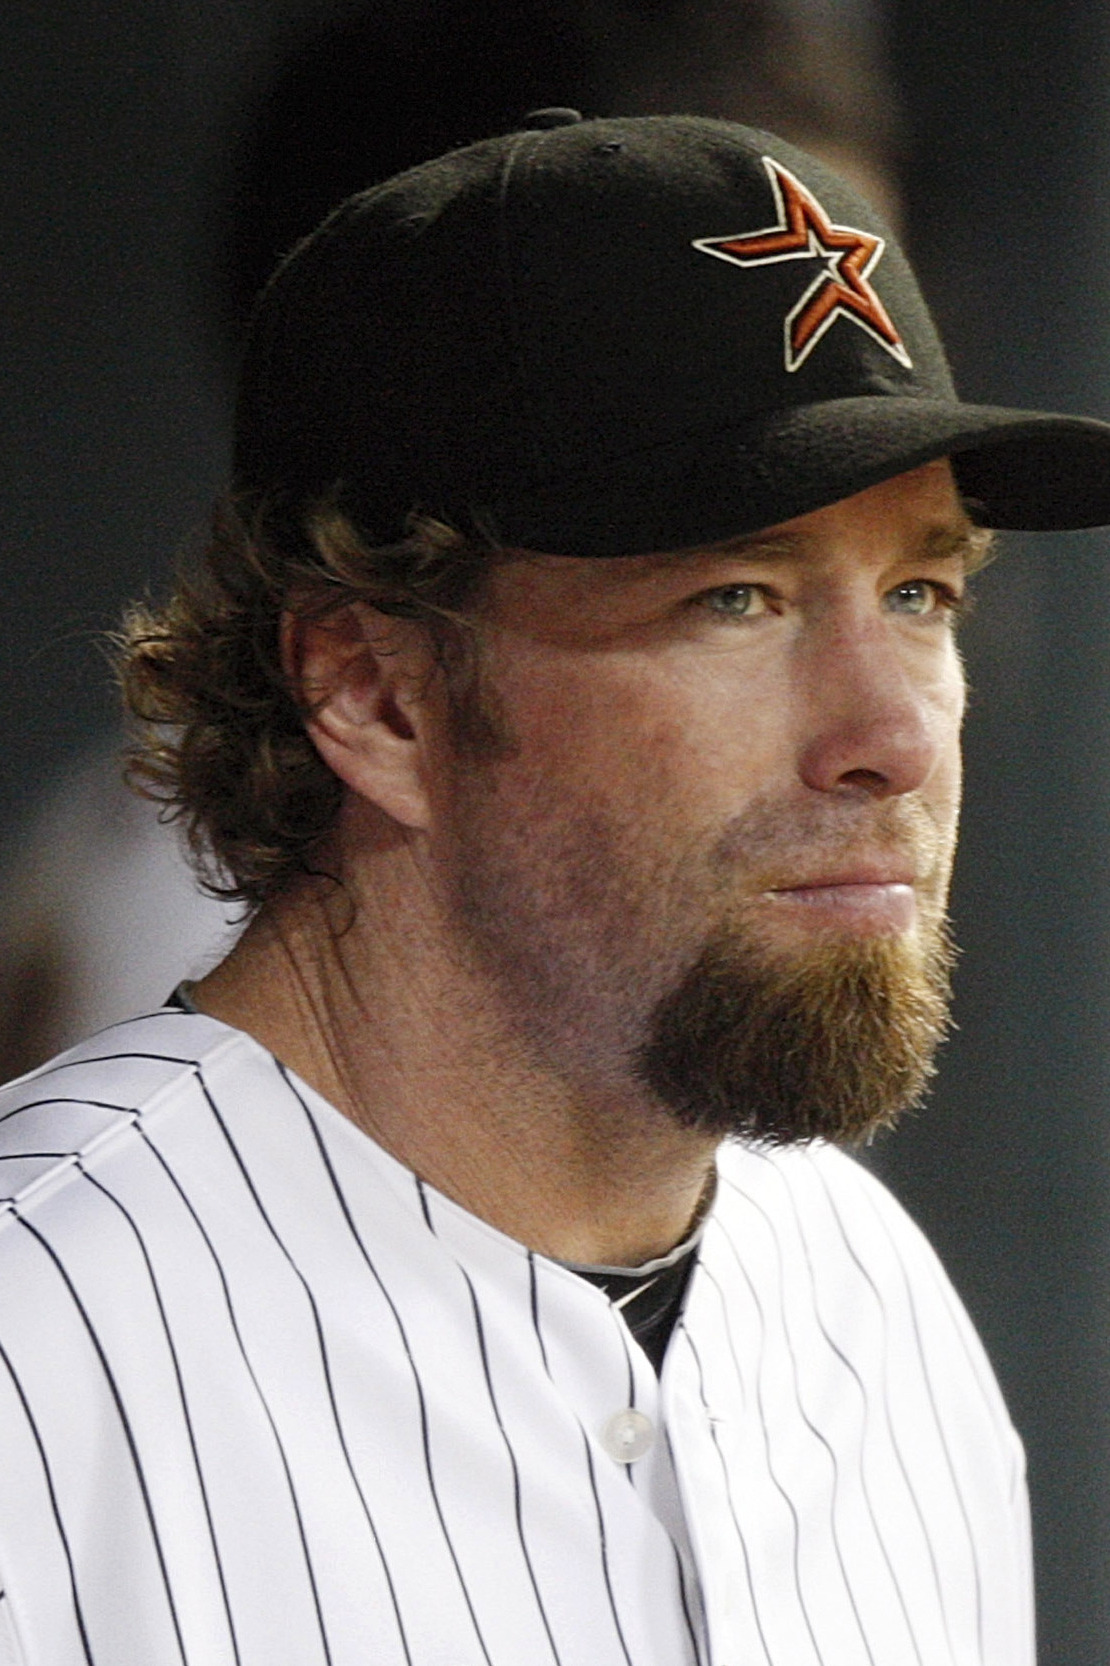 Jeff Bagwell, Craig Biggio inducted to Houston Hall of Fame